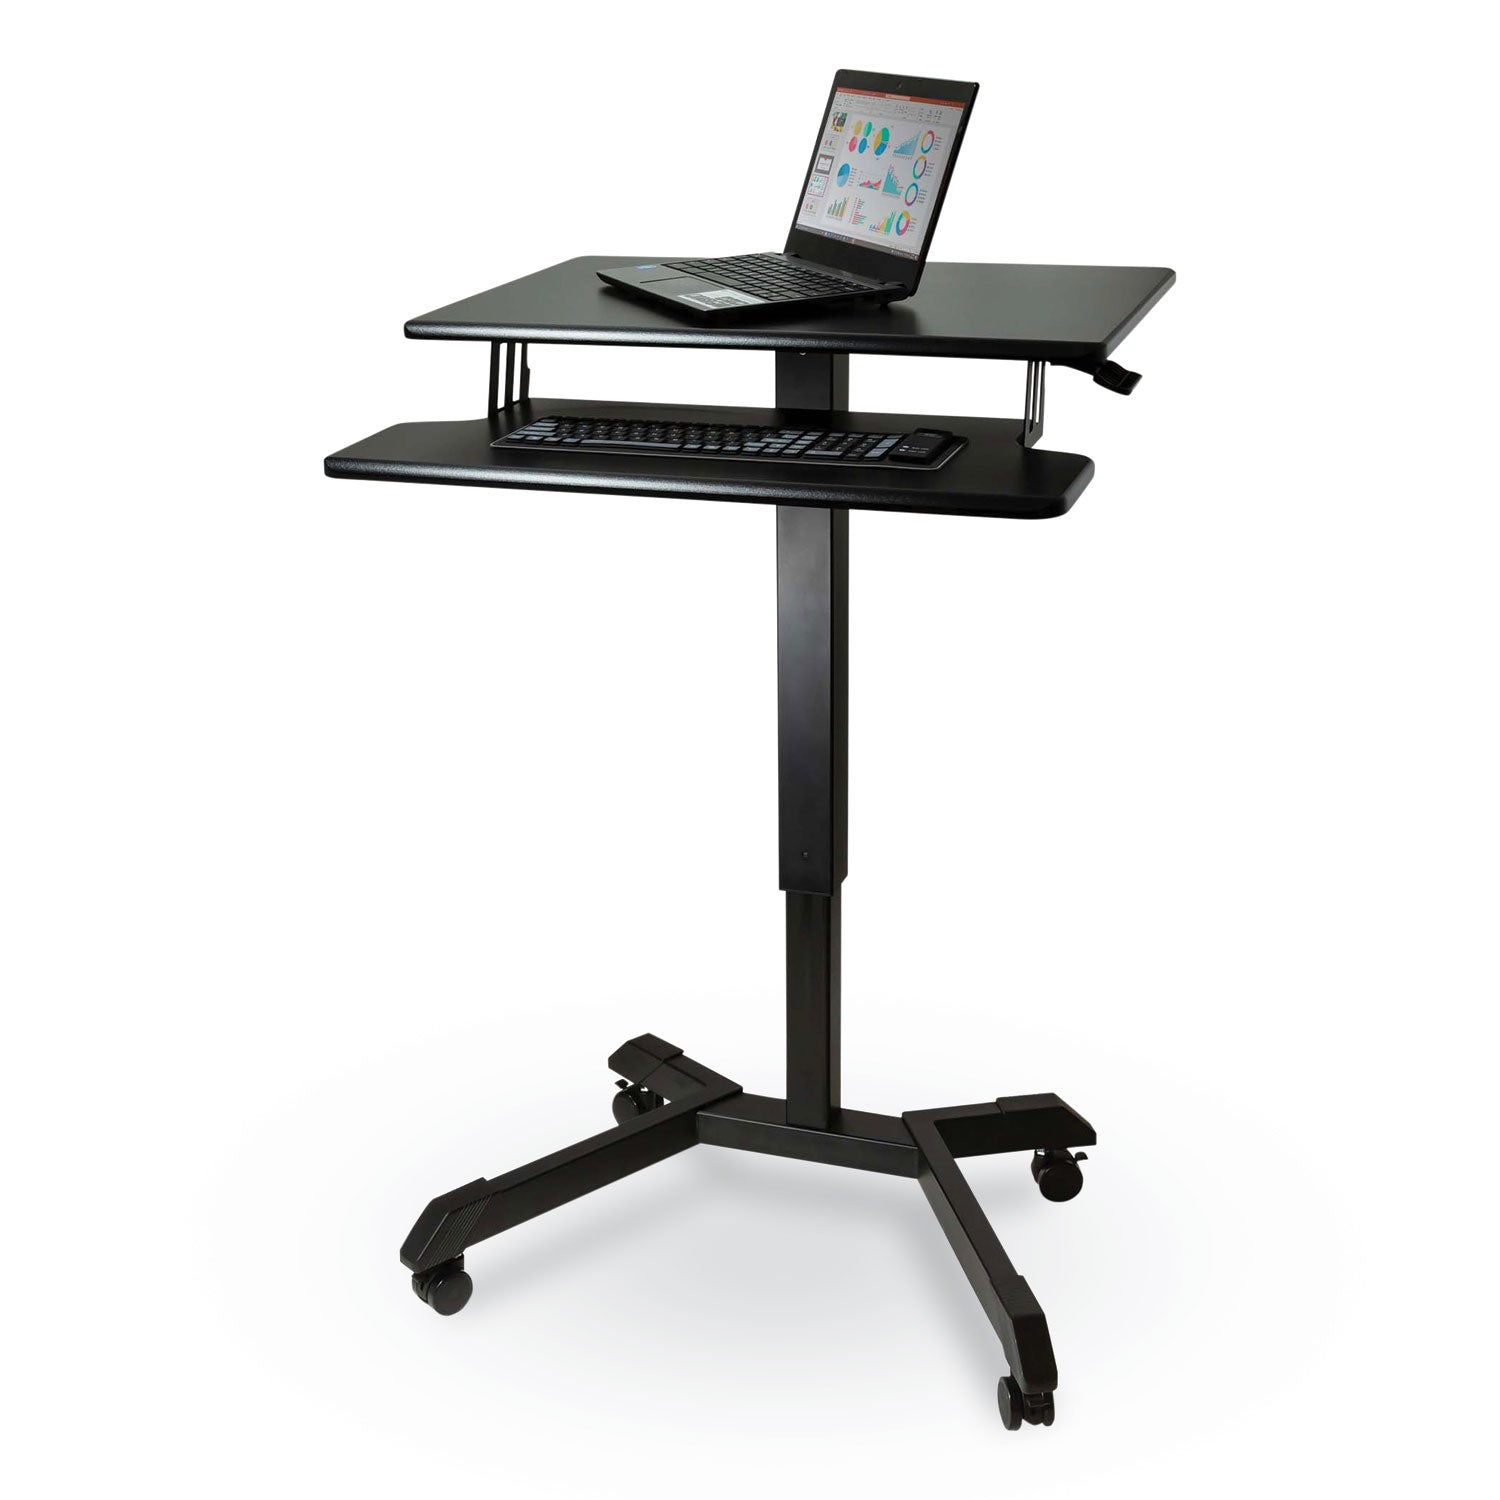 mobile-height-adjustable-standing-desk-with-keyboard-tray-256-x-177-x-29-to-44-black-ships-in-1-3-business-days_vctdc550 - 2